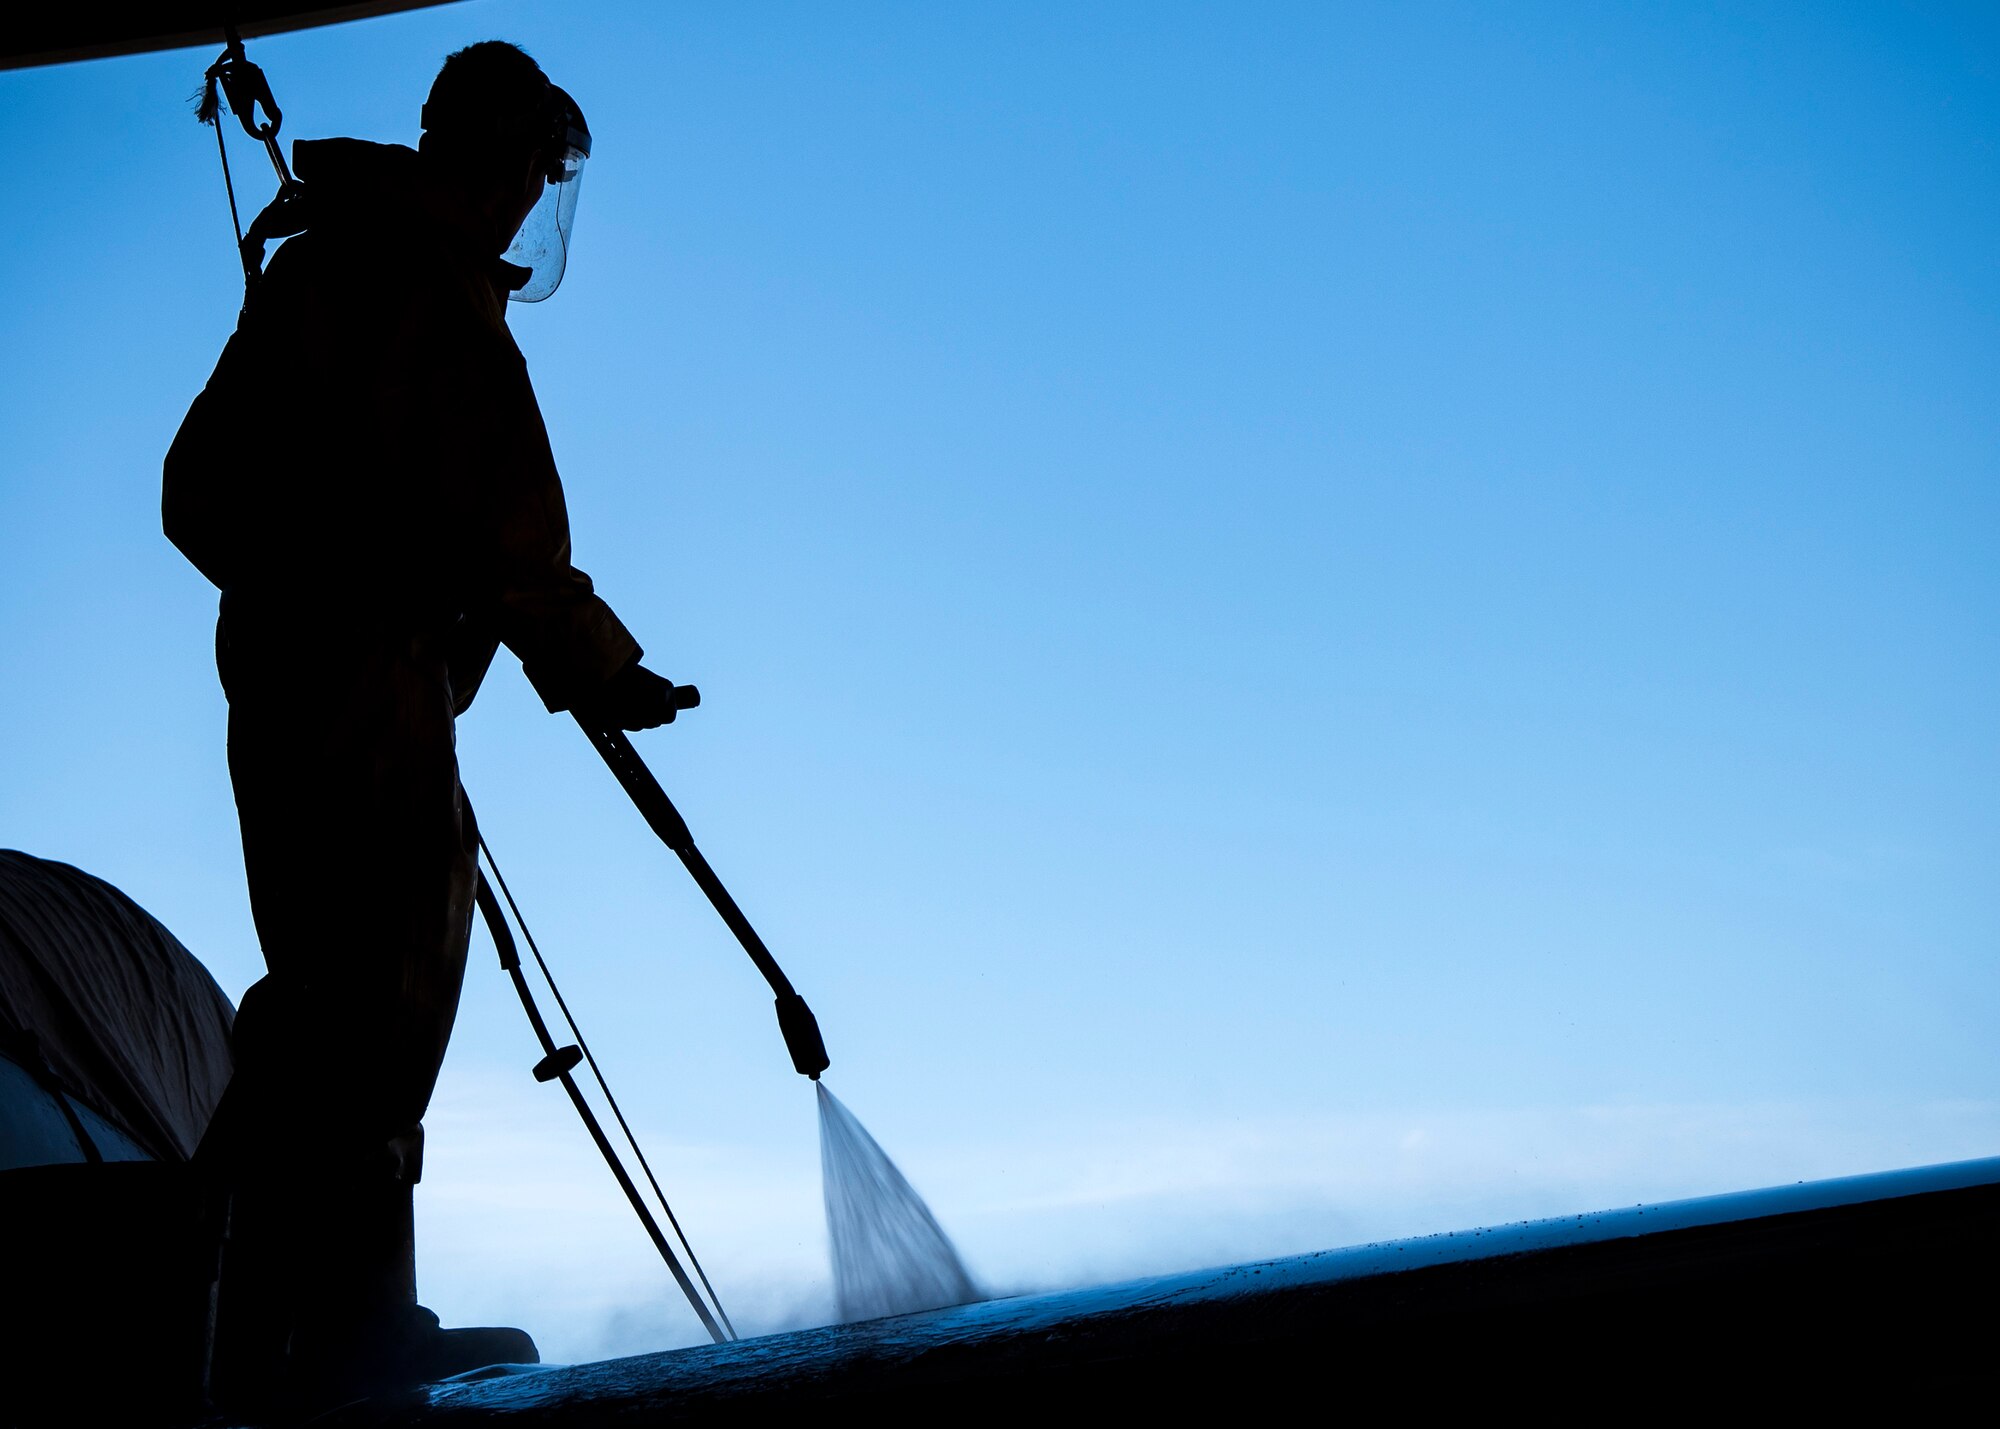 Airman 1st Class Benjamin Jones, 74th Aircraft Maintenance Unit crew chief, uses a power washer to clean the wing of an A-10C Thunderbolt II, Feb. 25, 2019, at Moody Air Force Base, Ga. On top of their daily scheduled maintenance a team of six Airmen dedicated over 10 hours washing the A-10 to ensure the aircraft was free of any surface or structural deficiencies that could present a safety hazard during flight. (U.S. Air Force photo by Airman 1st Class Eugene Oliver)